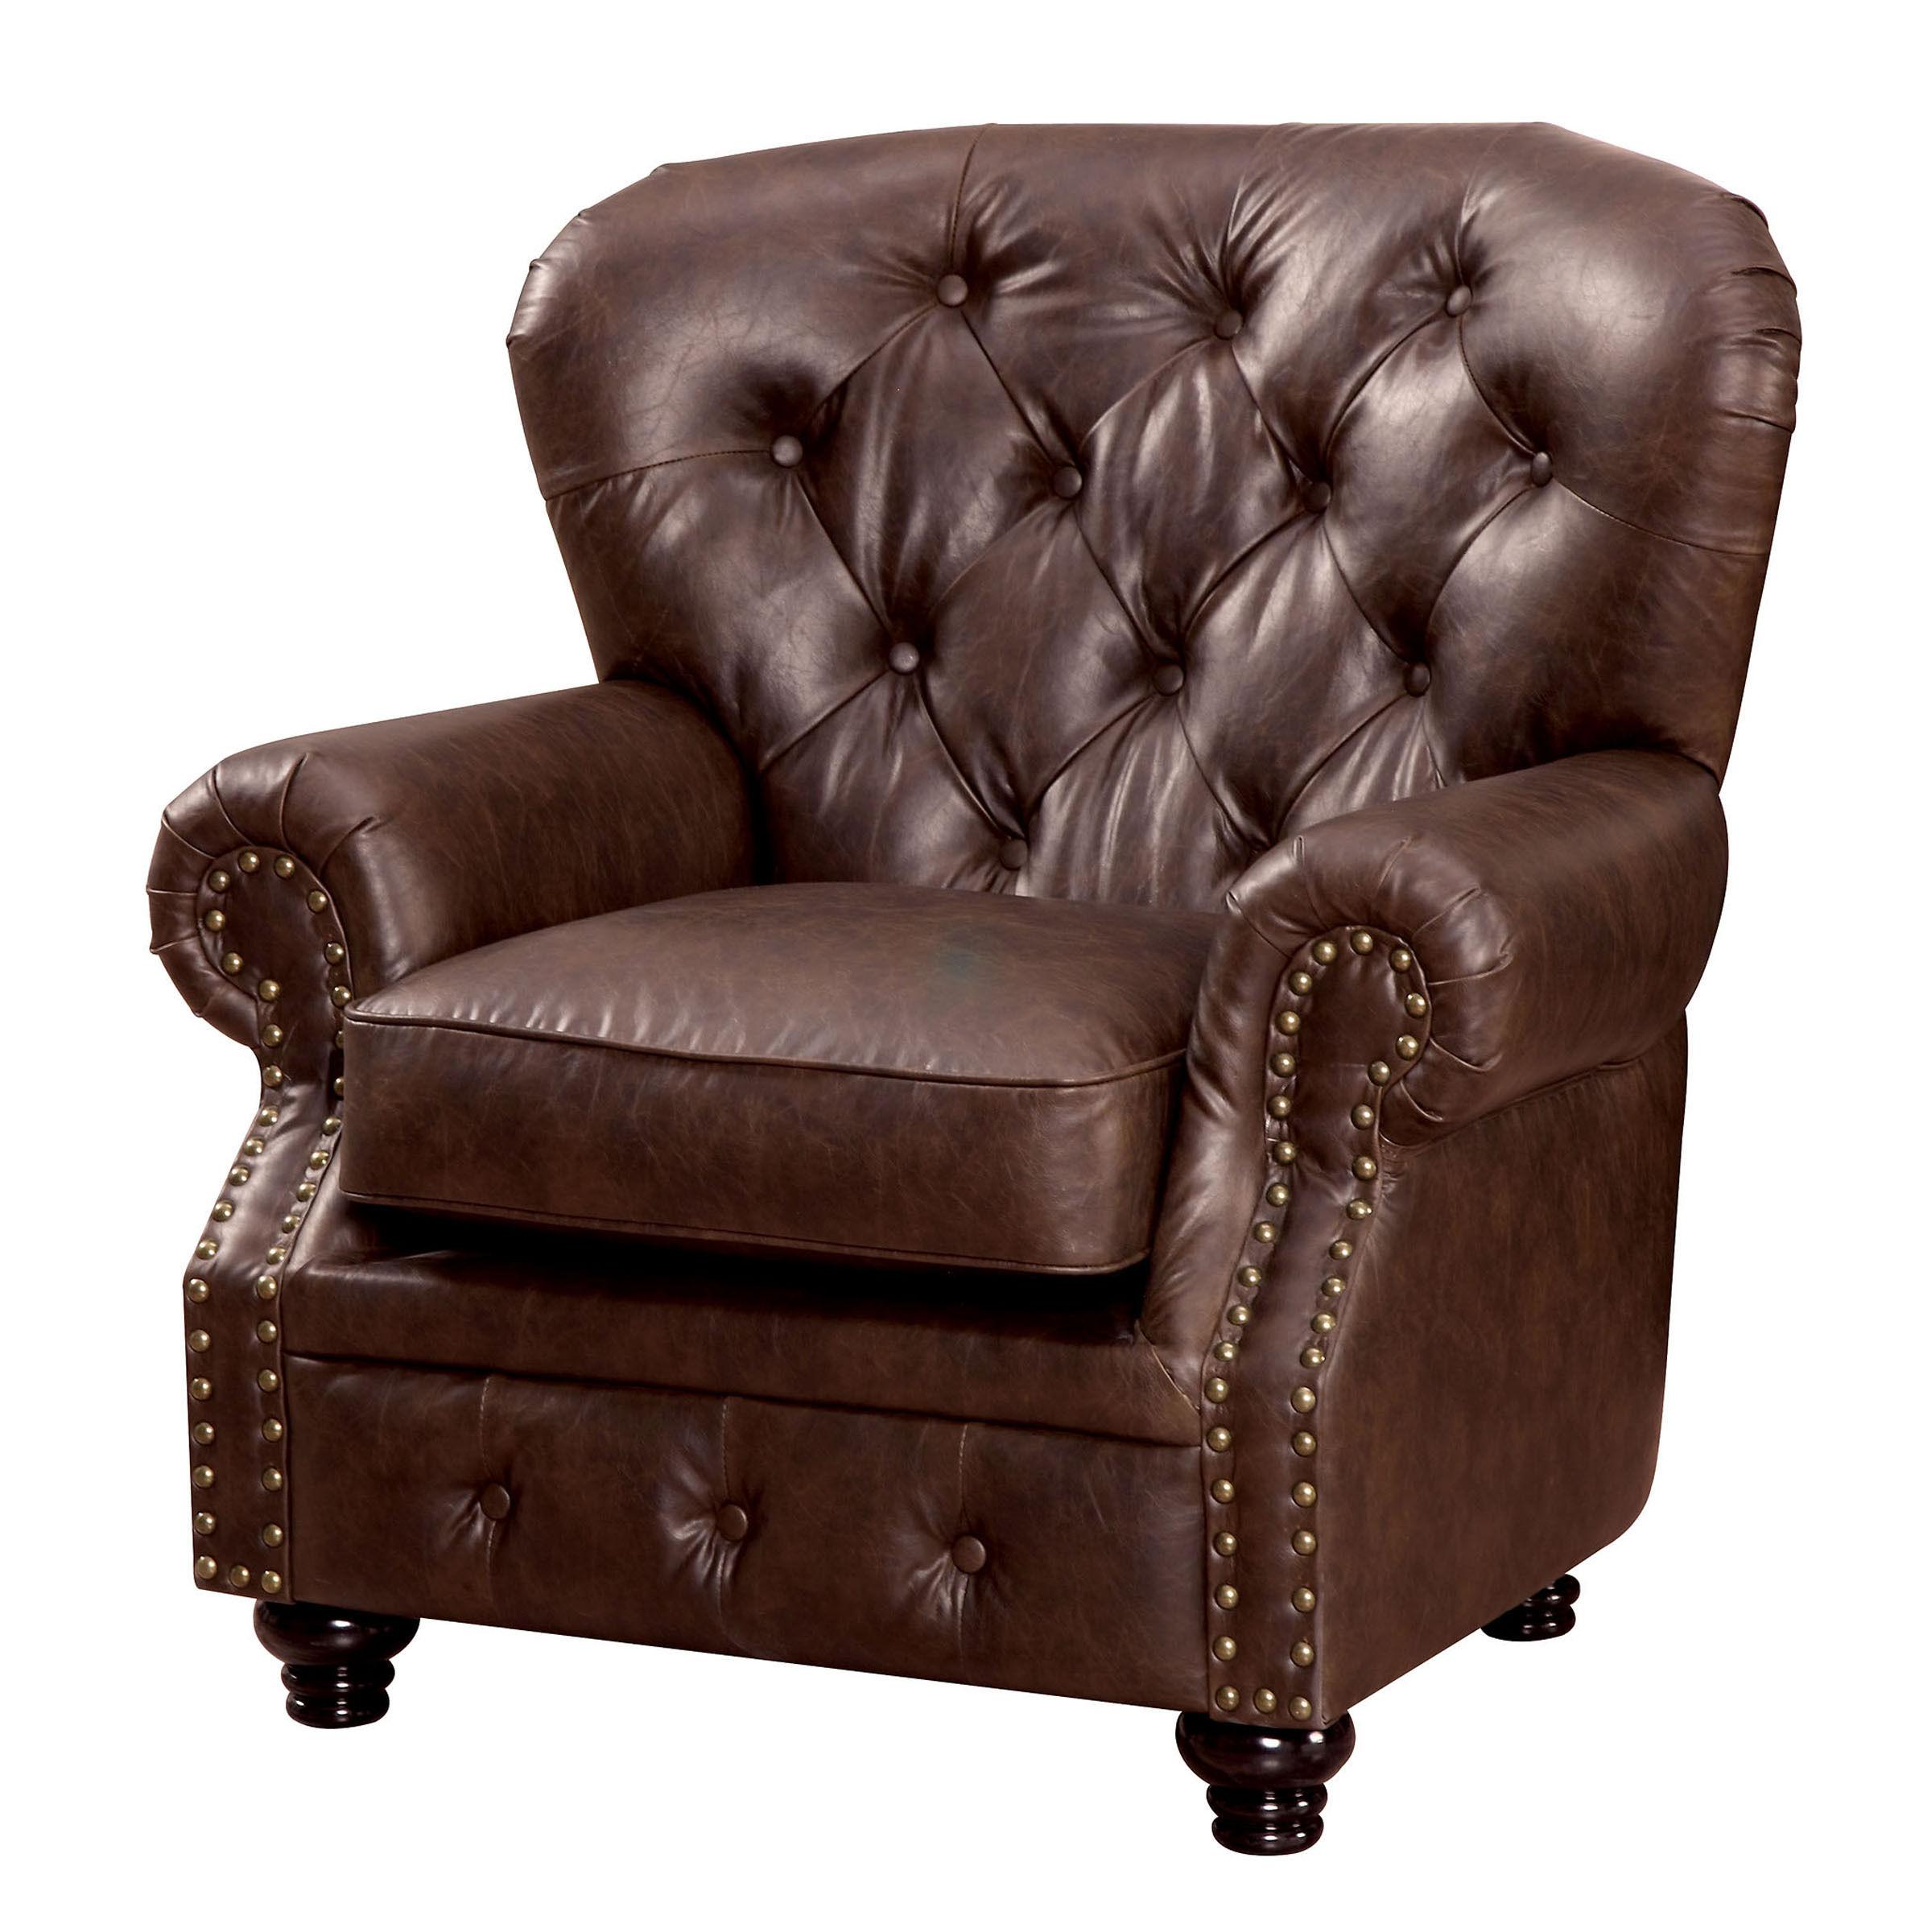 Transitional Arm Chair CM6269BR-CH Stanford CM6269BR-CH in Brown Leatherette